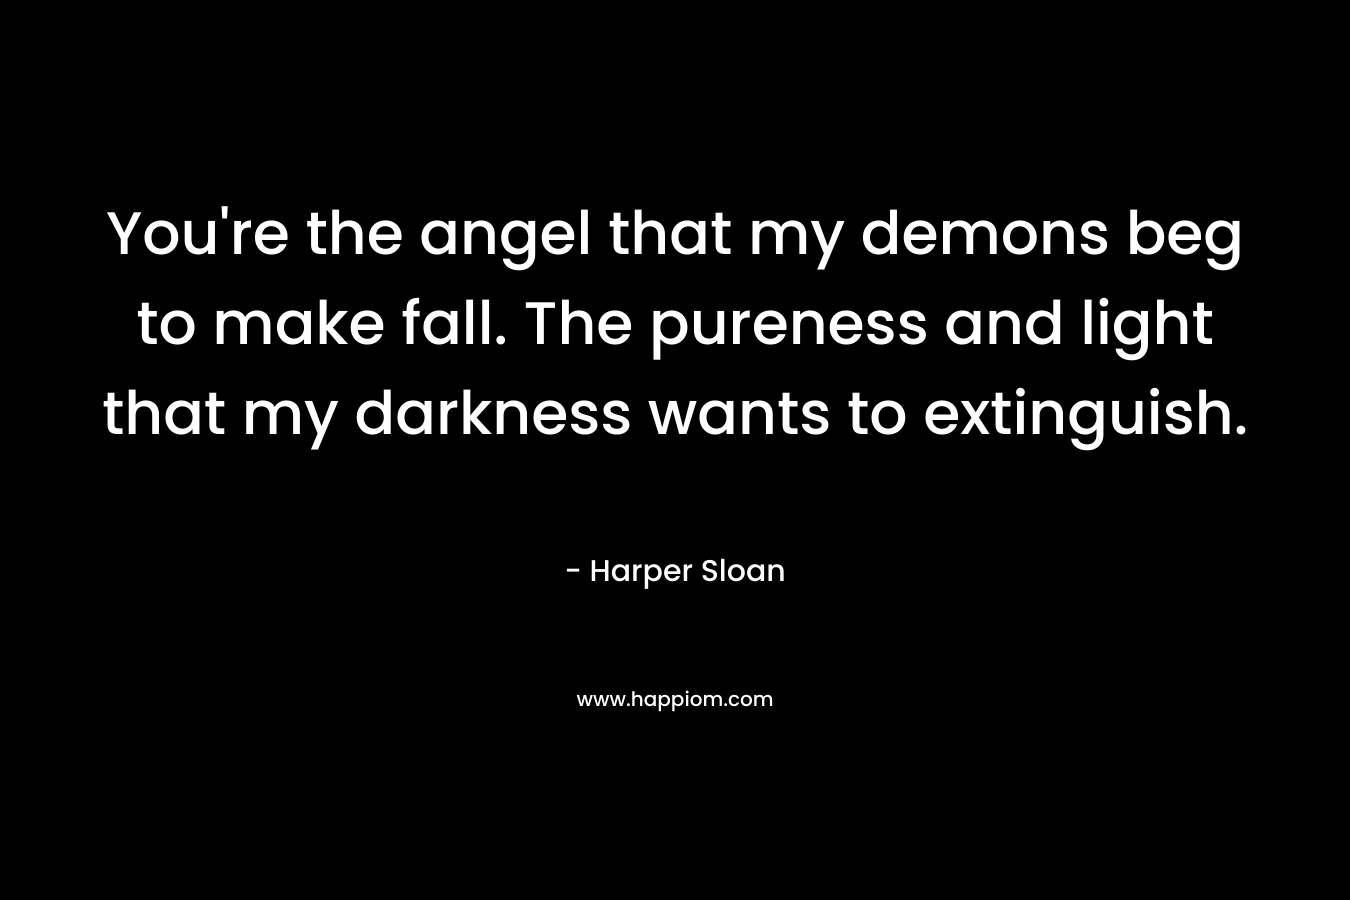 You're the angel that my demons beg to make fall. The pureness and light that my darkness wants to extinguish.